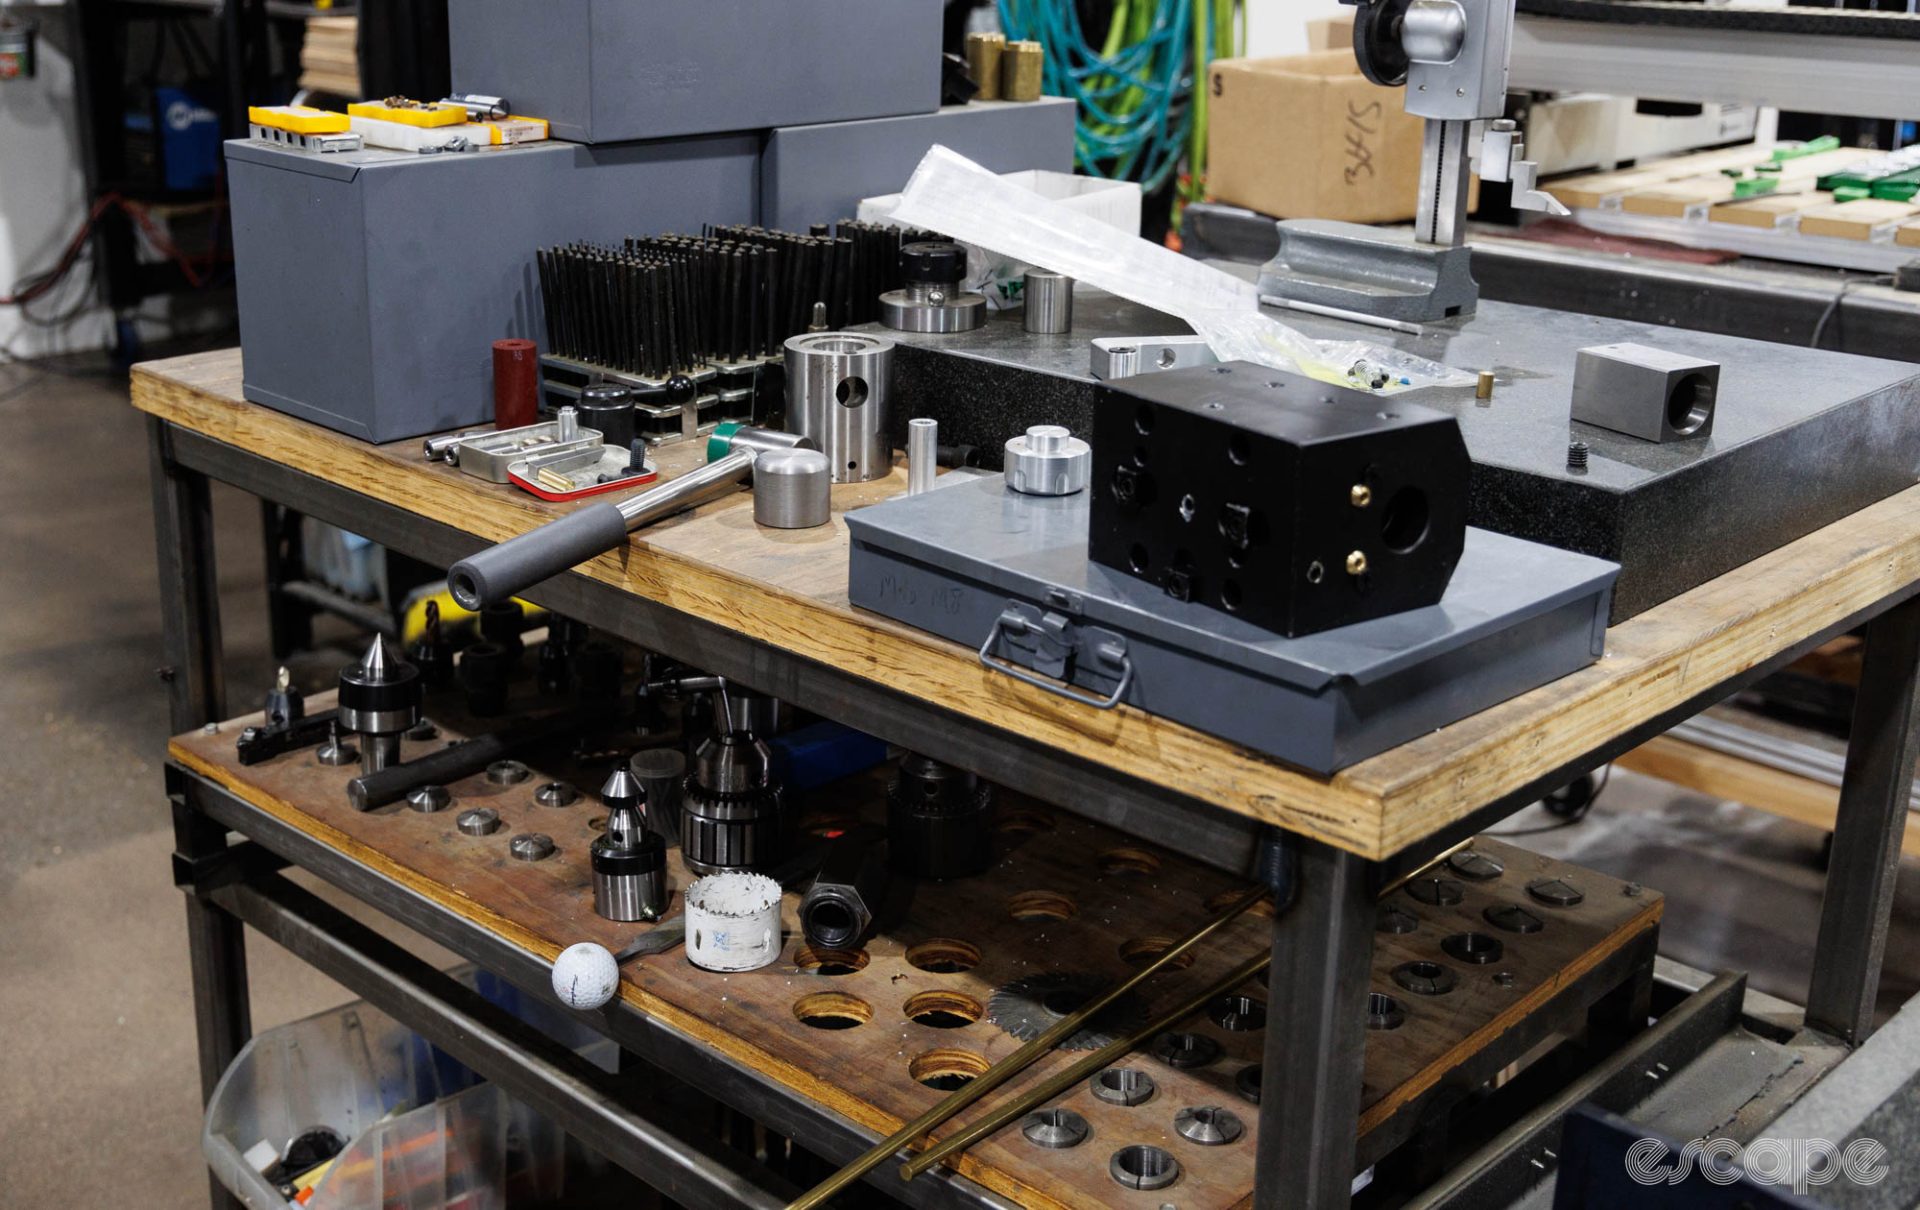 A number of milling tool attachments sit on a low bench, tucked under a waist-height bench with a hammer and miscellaneous other tools.